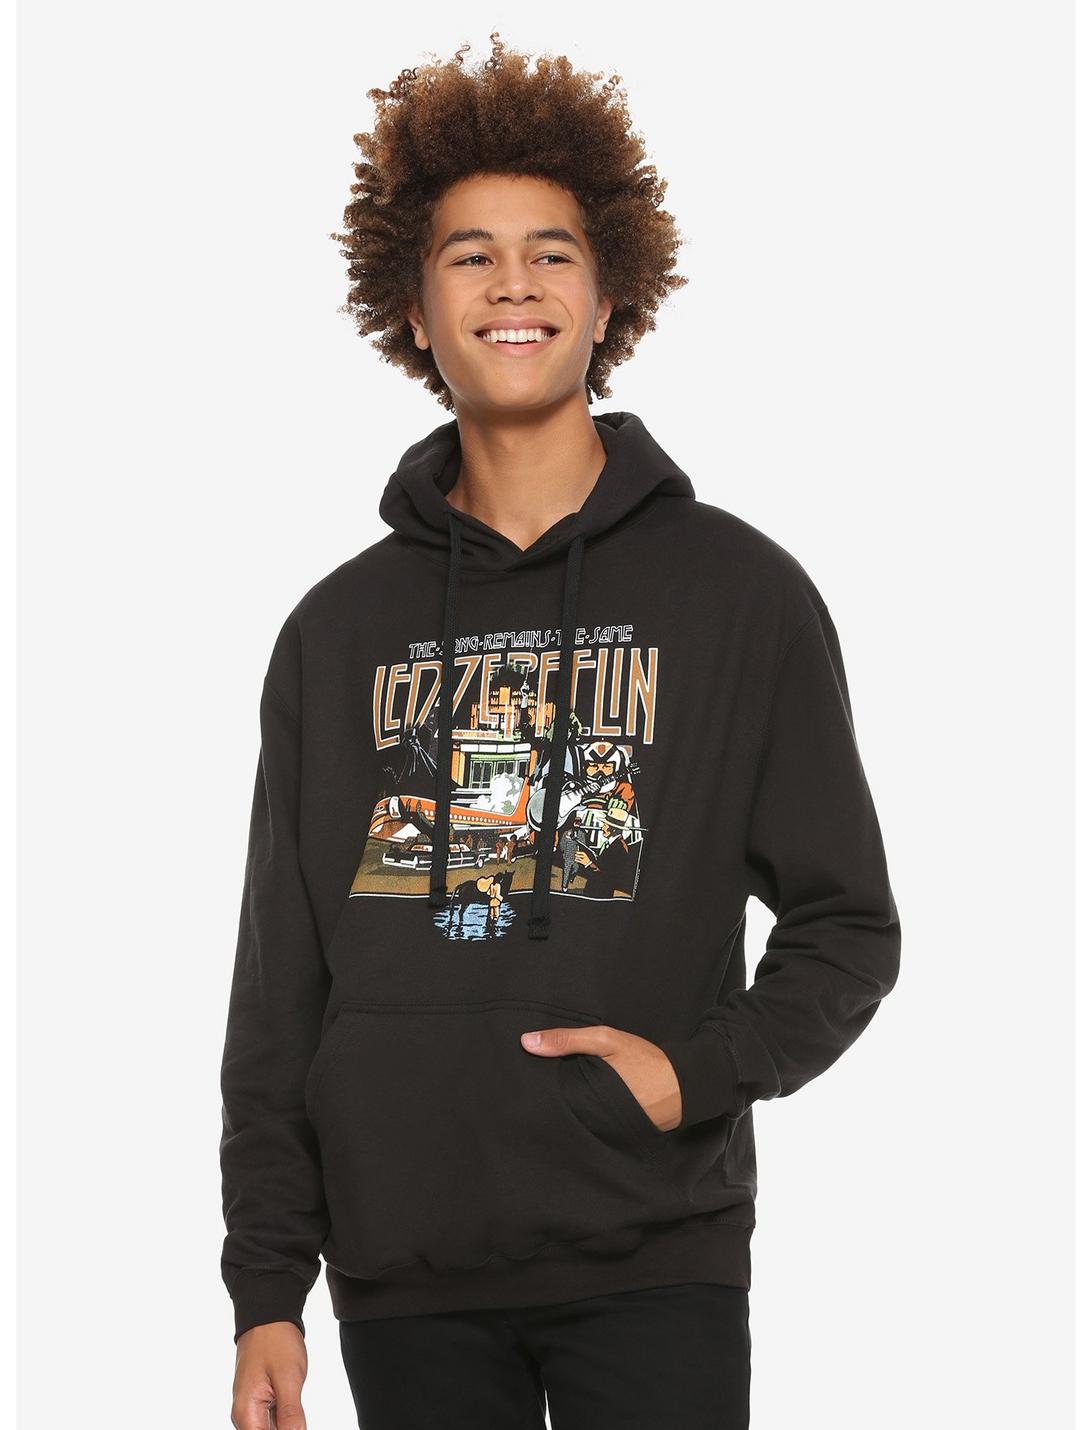 Led Zeppelin The Song Remains The Same Hoodie, BLACK, hi-res